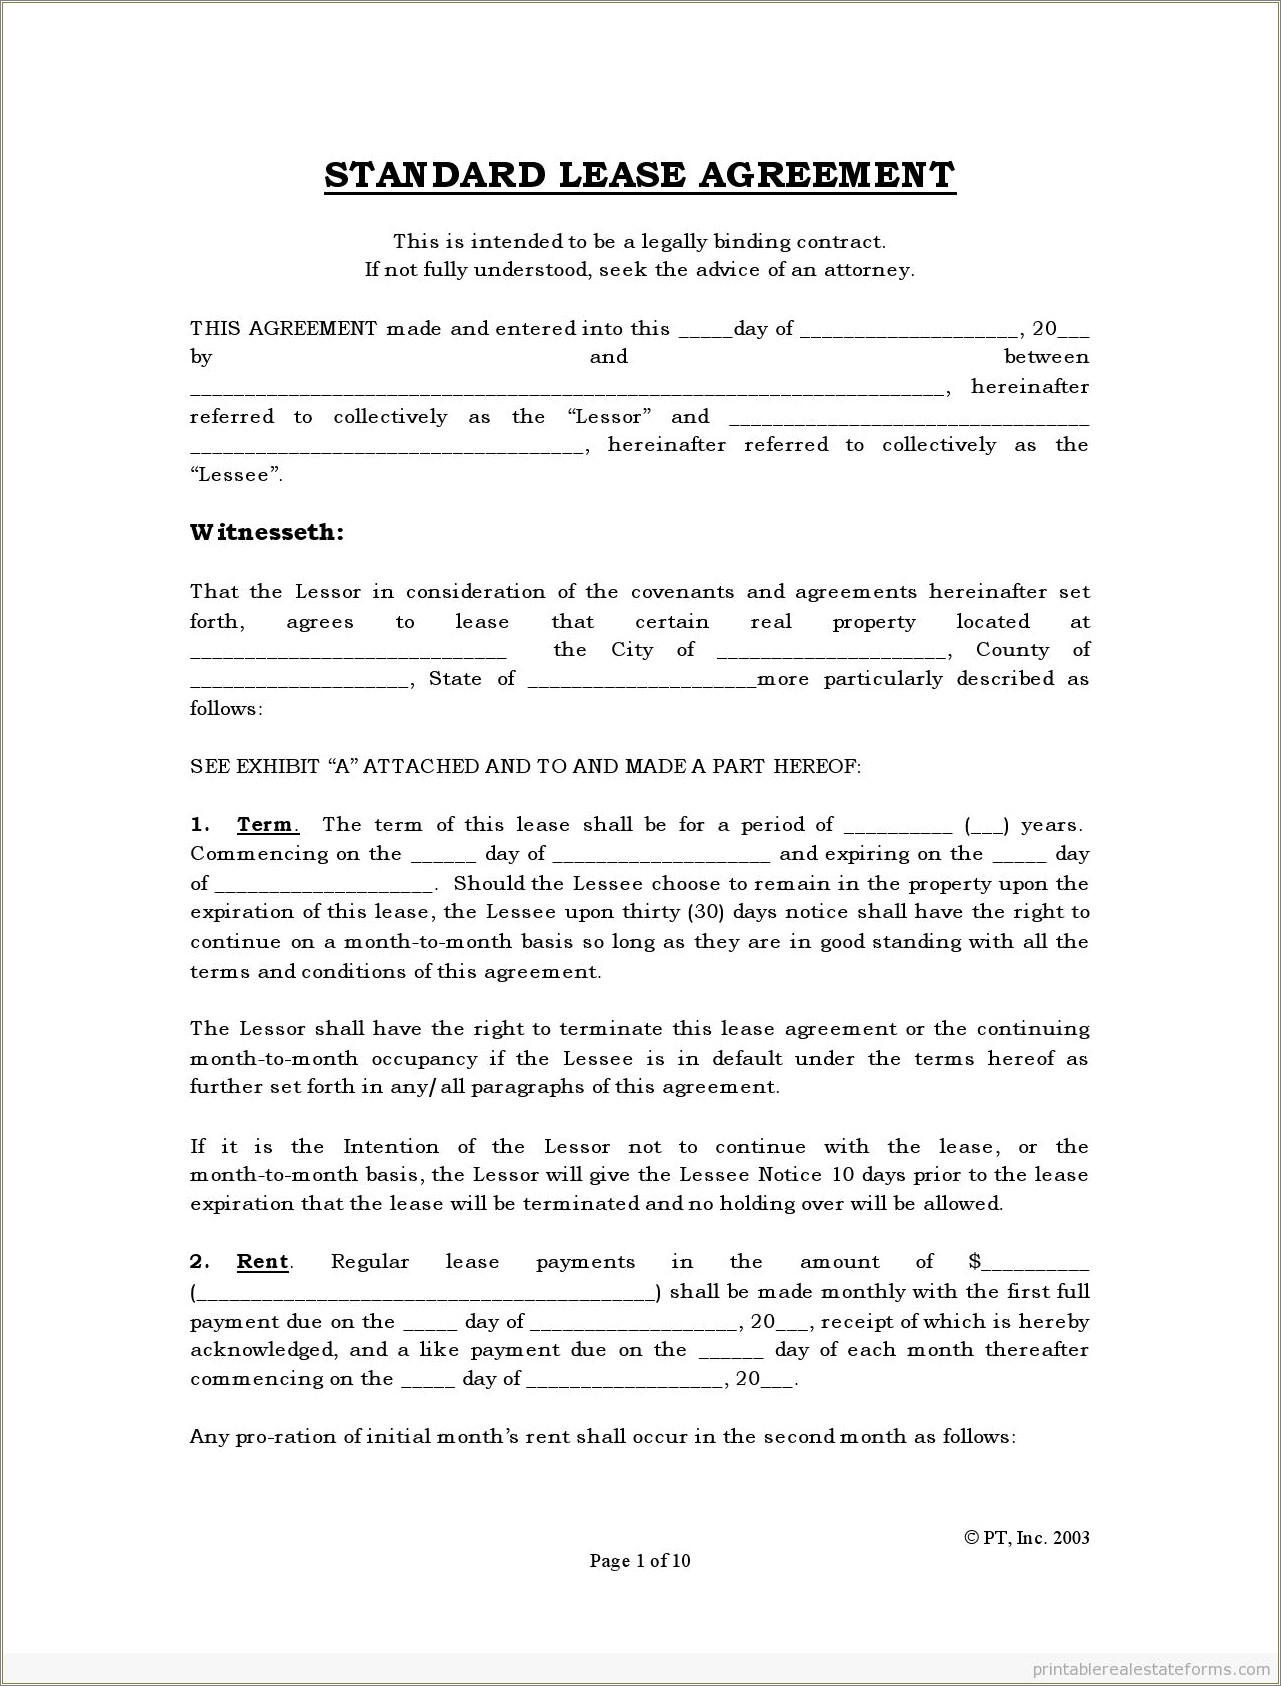 Free California Commercial Real Estate Lease Agreement Template